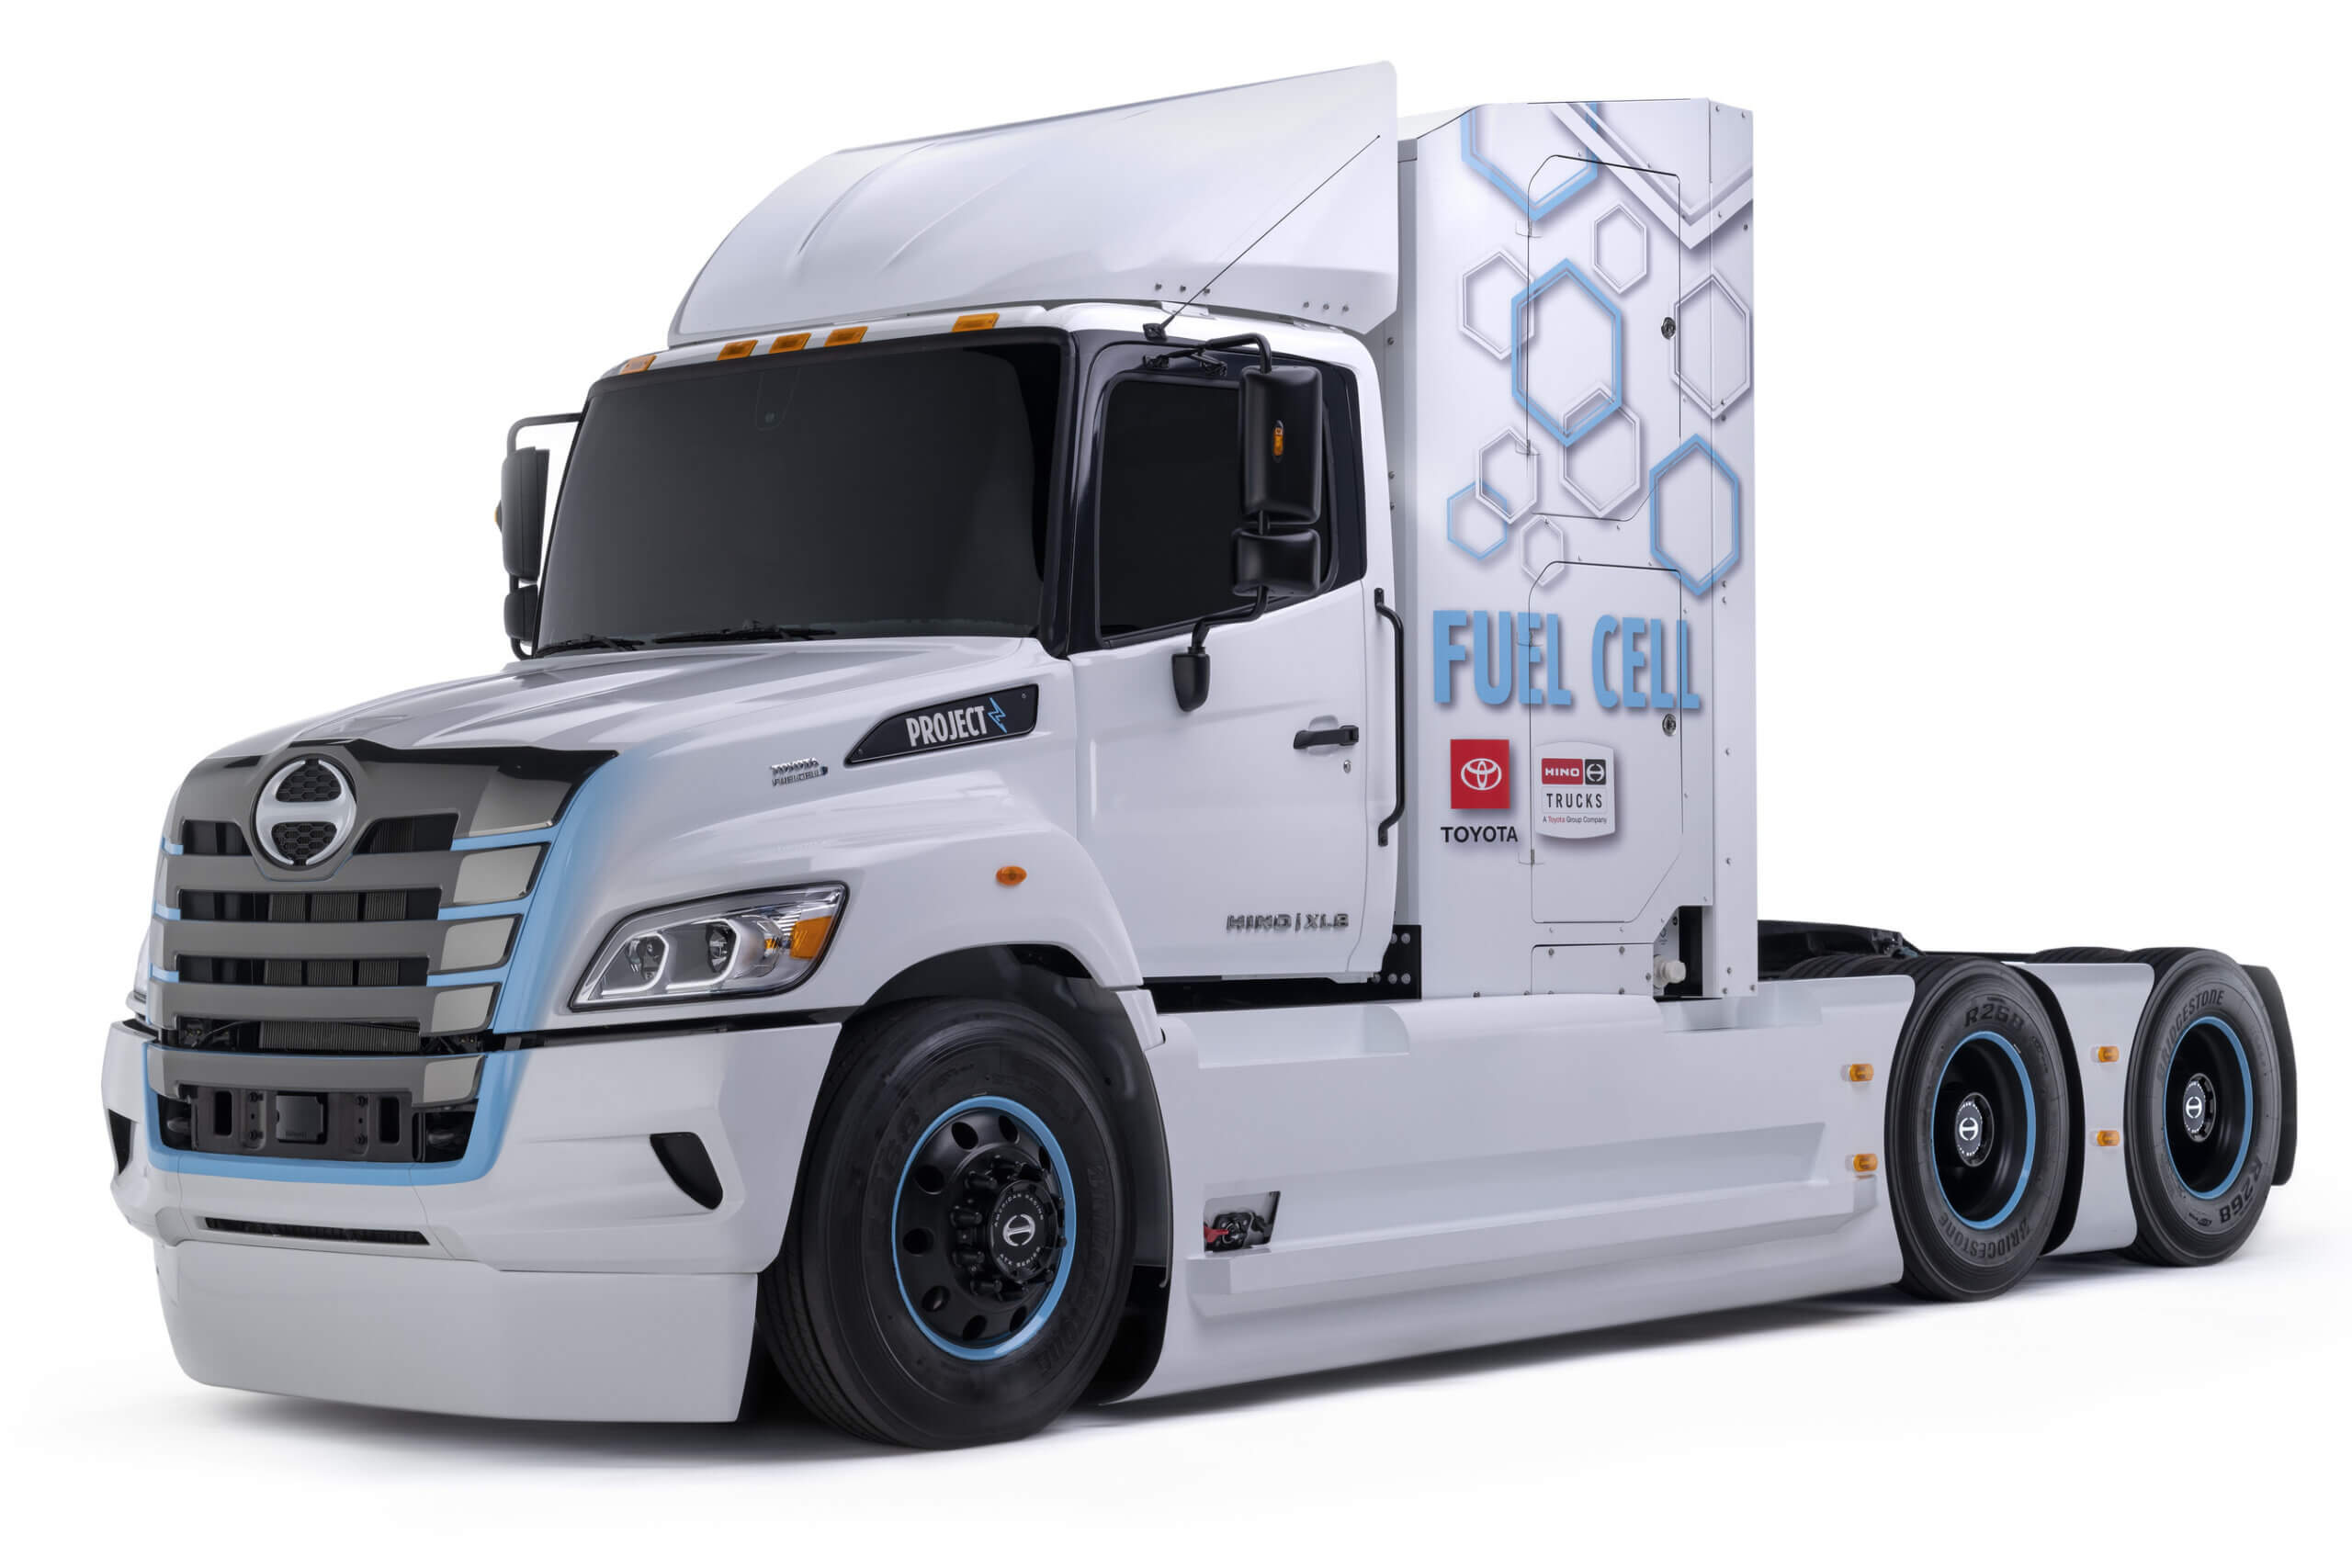 Hino hydrogen truck unveiled in California | Mobility | H2 View